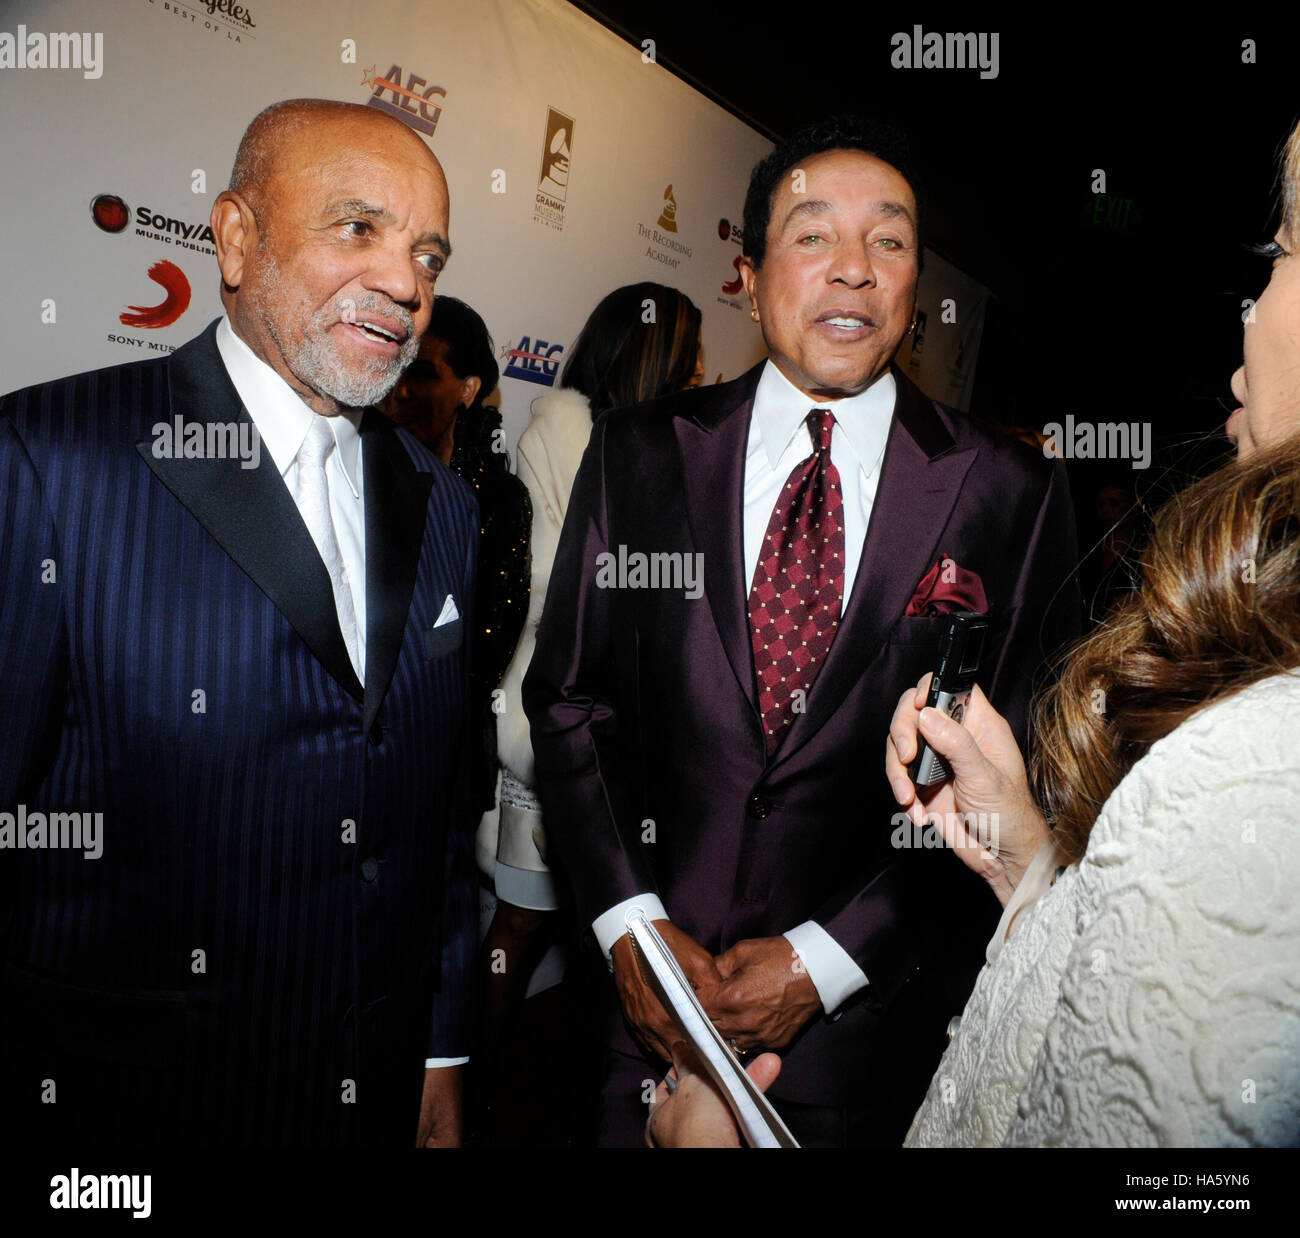 (L-R) Motown founder Berry Gordy and GRAMMY winner Smokey Robinson honored at the first-ever Architects of Sound Awards at the GRAMMY Museum on November 11, 2013 in Los Angeles, California. Stock Photo